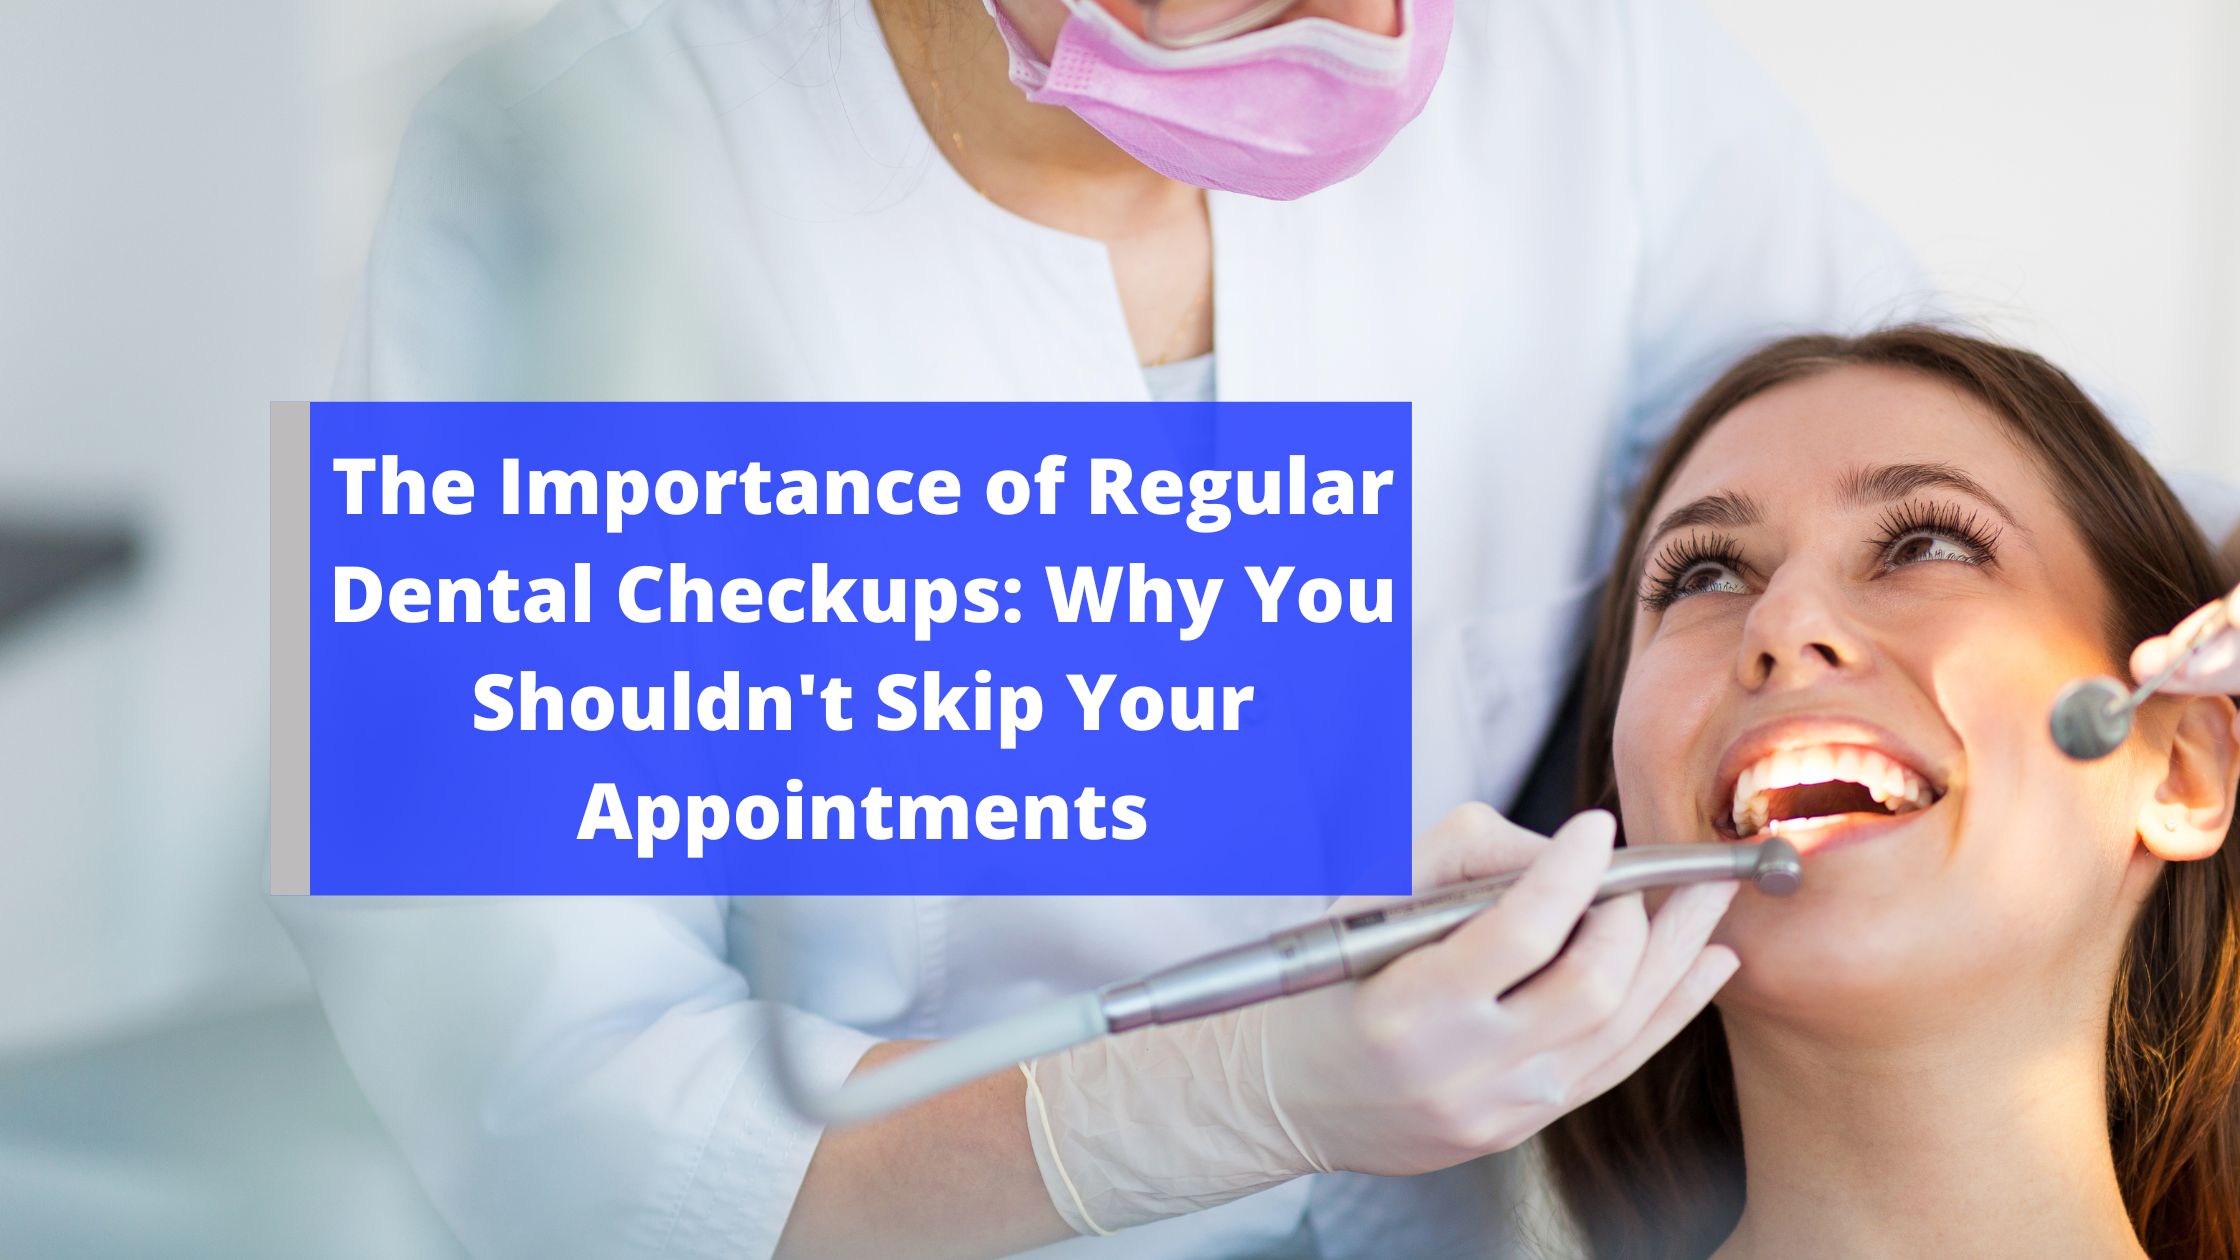 The Importance of Regular Dental Checkups: Why You Shouldn't Skip Your Appointments